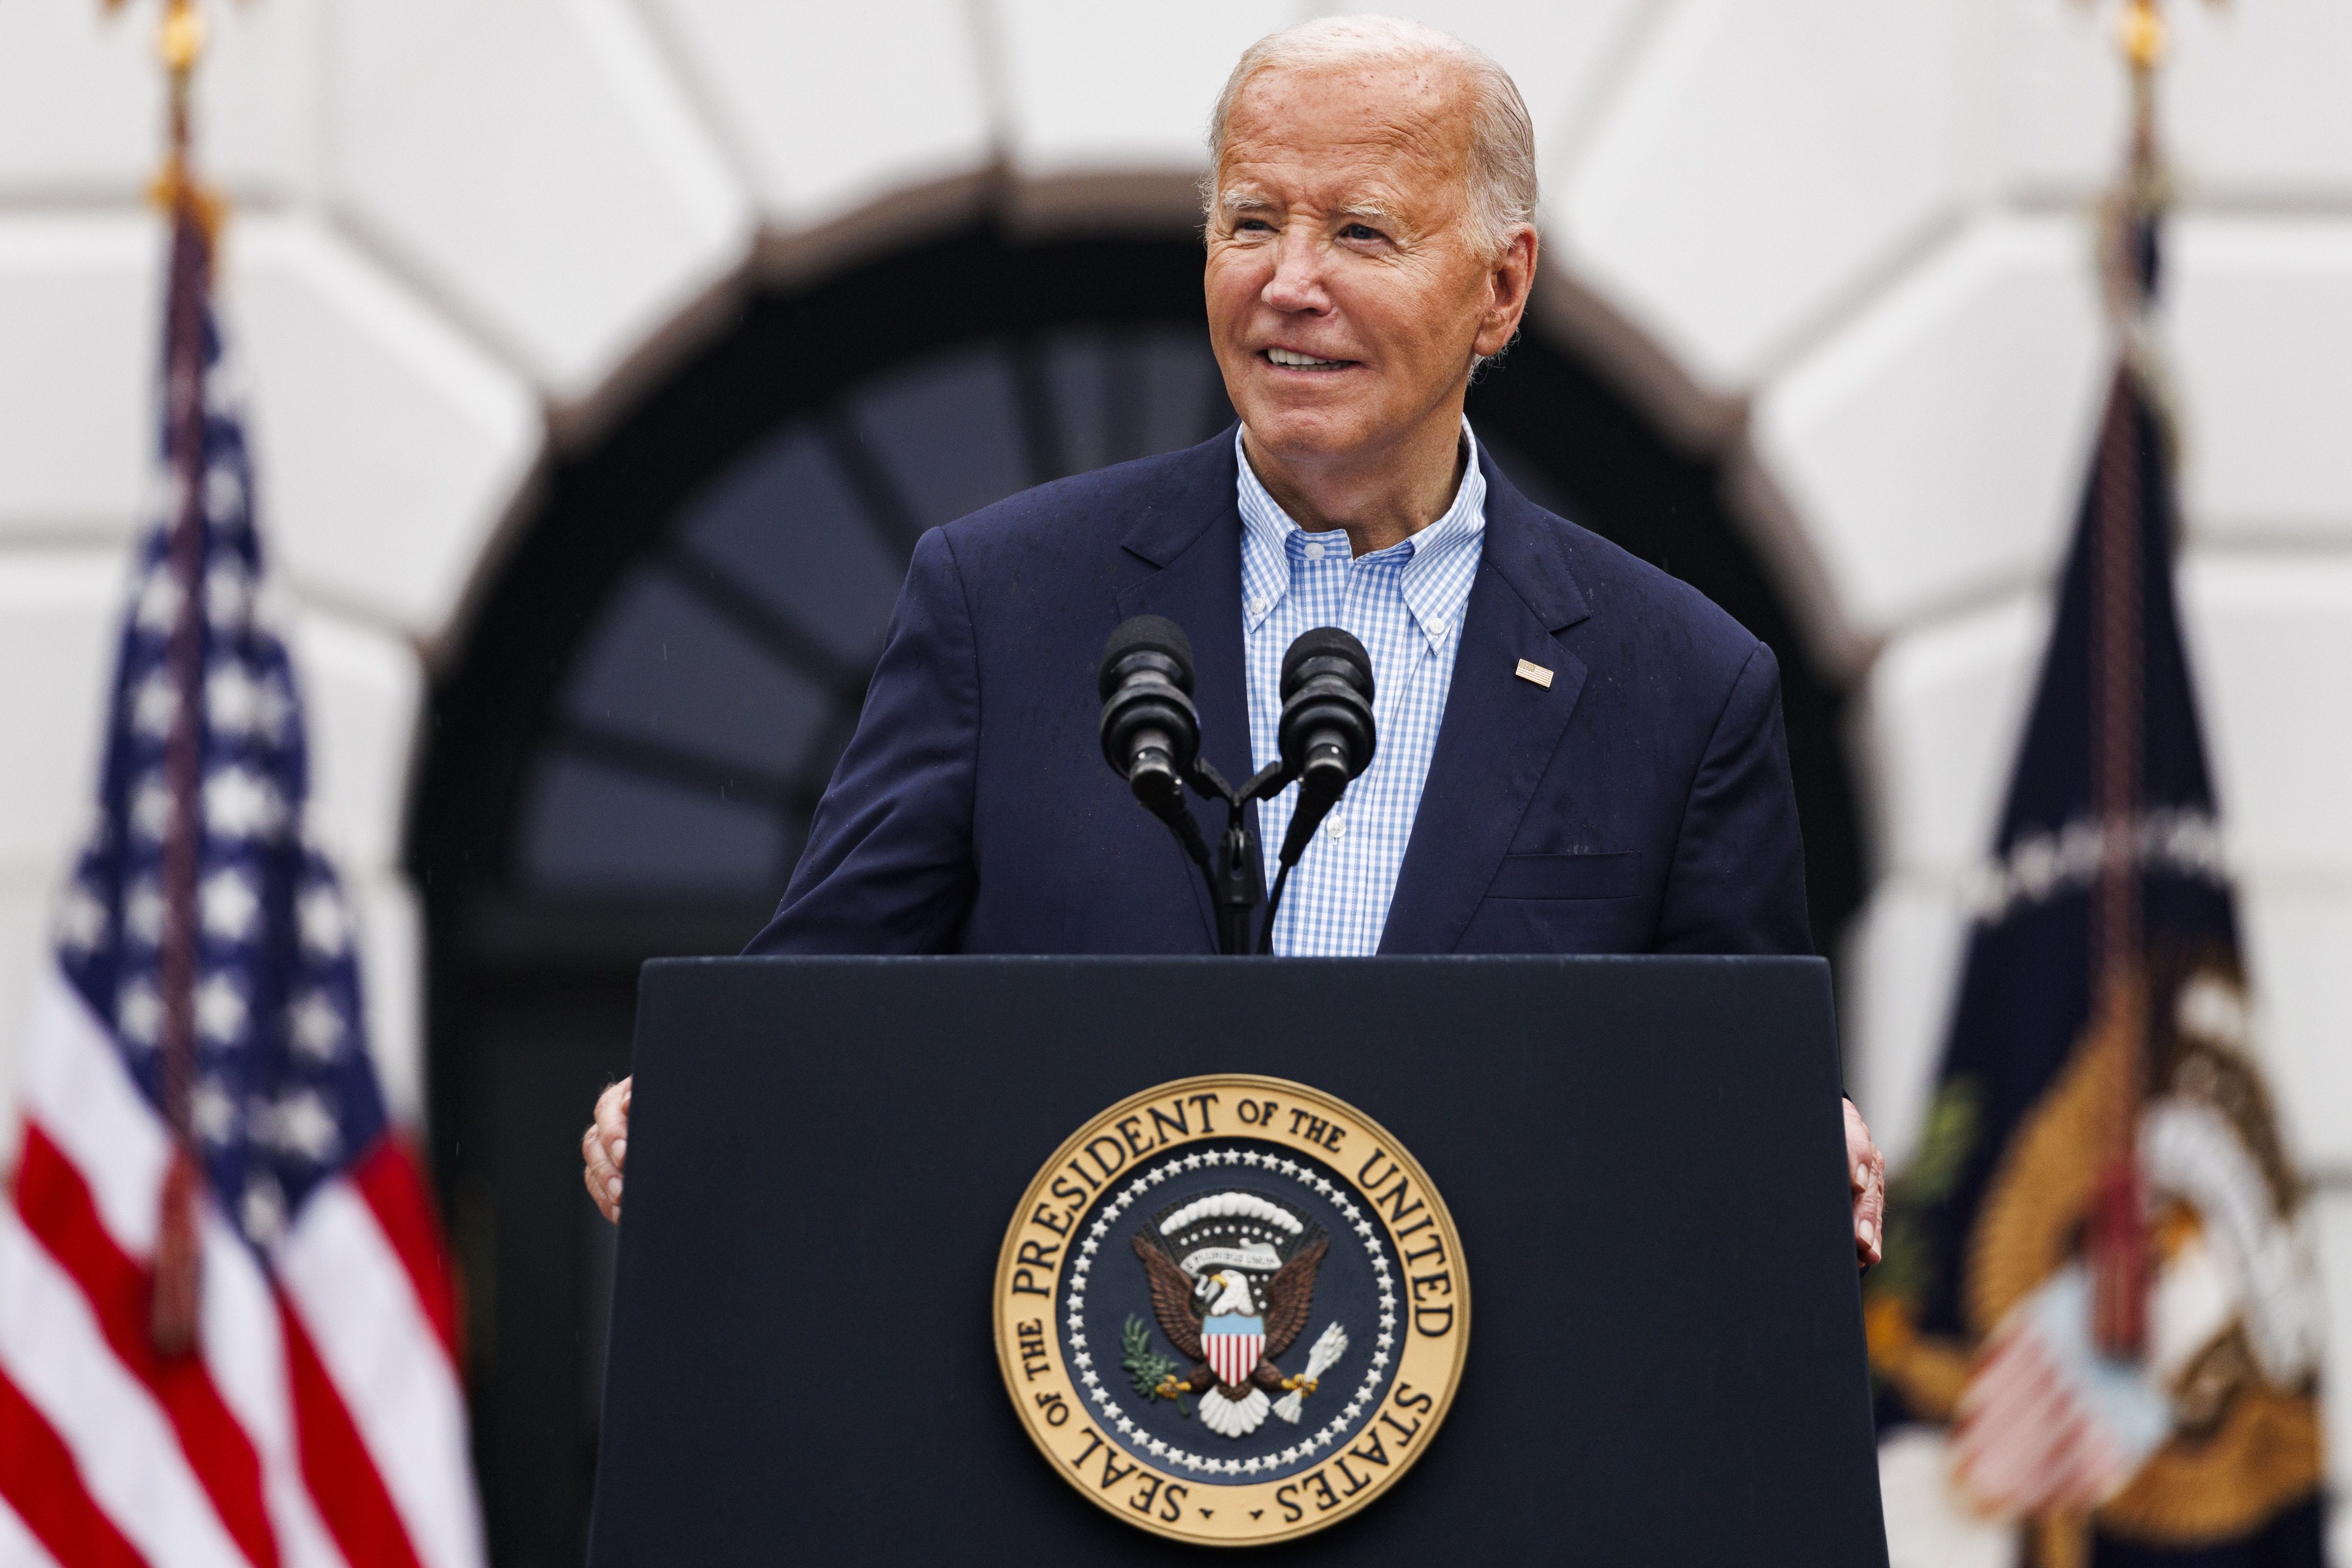 Joe Biden speaks at a podium with the presidential seal in front of microphones, American flags, and the White House backdrop